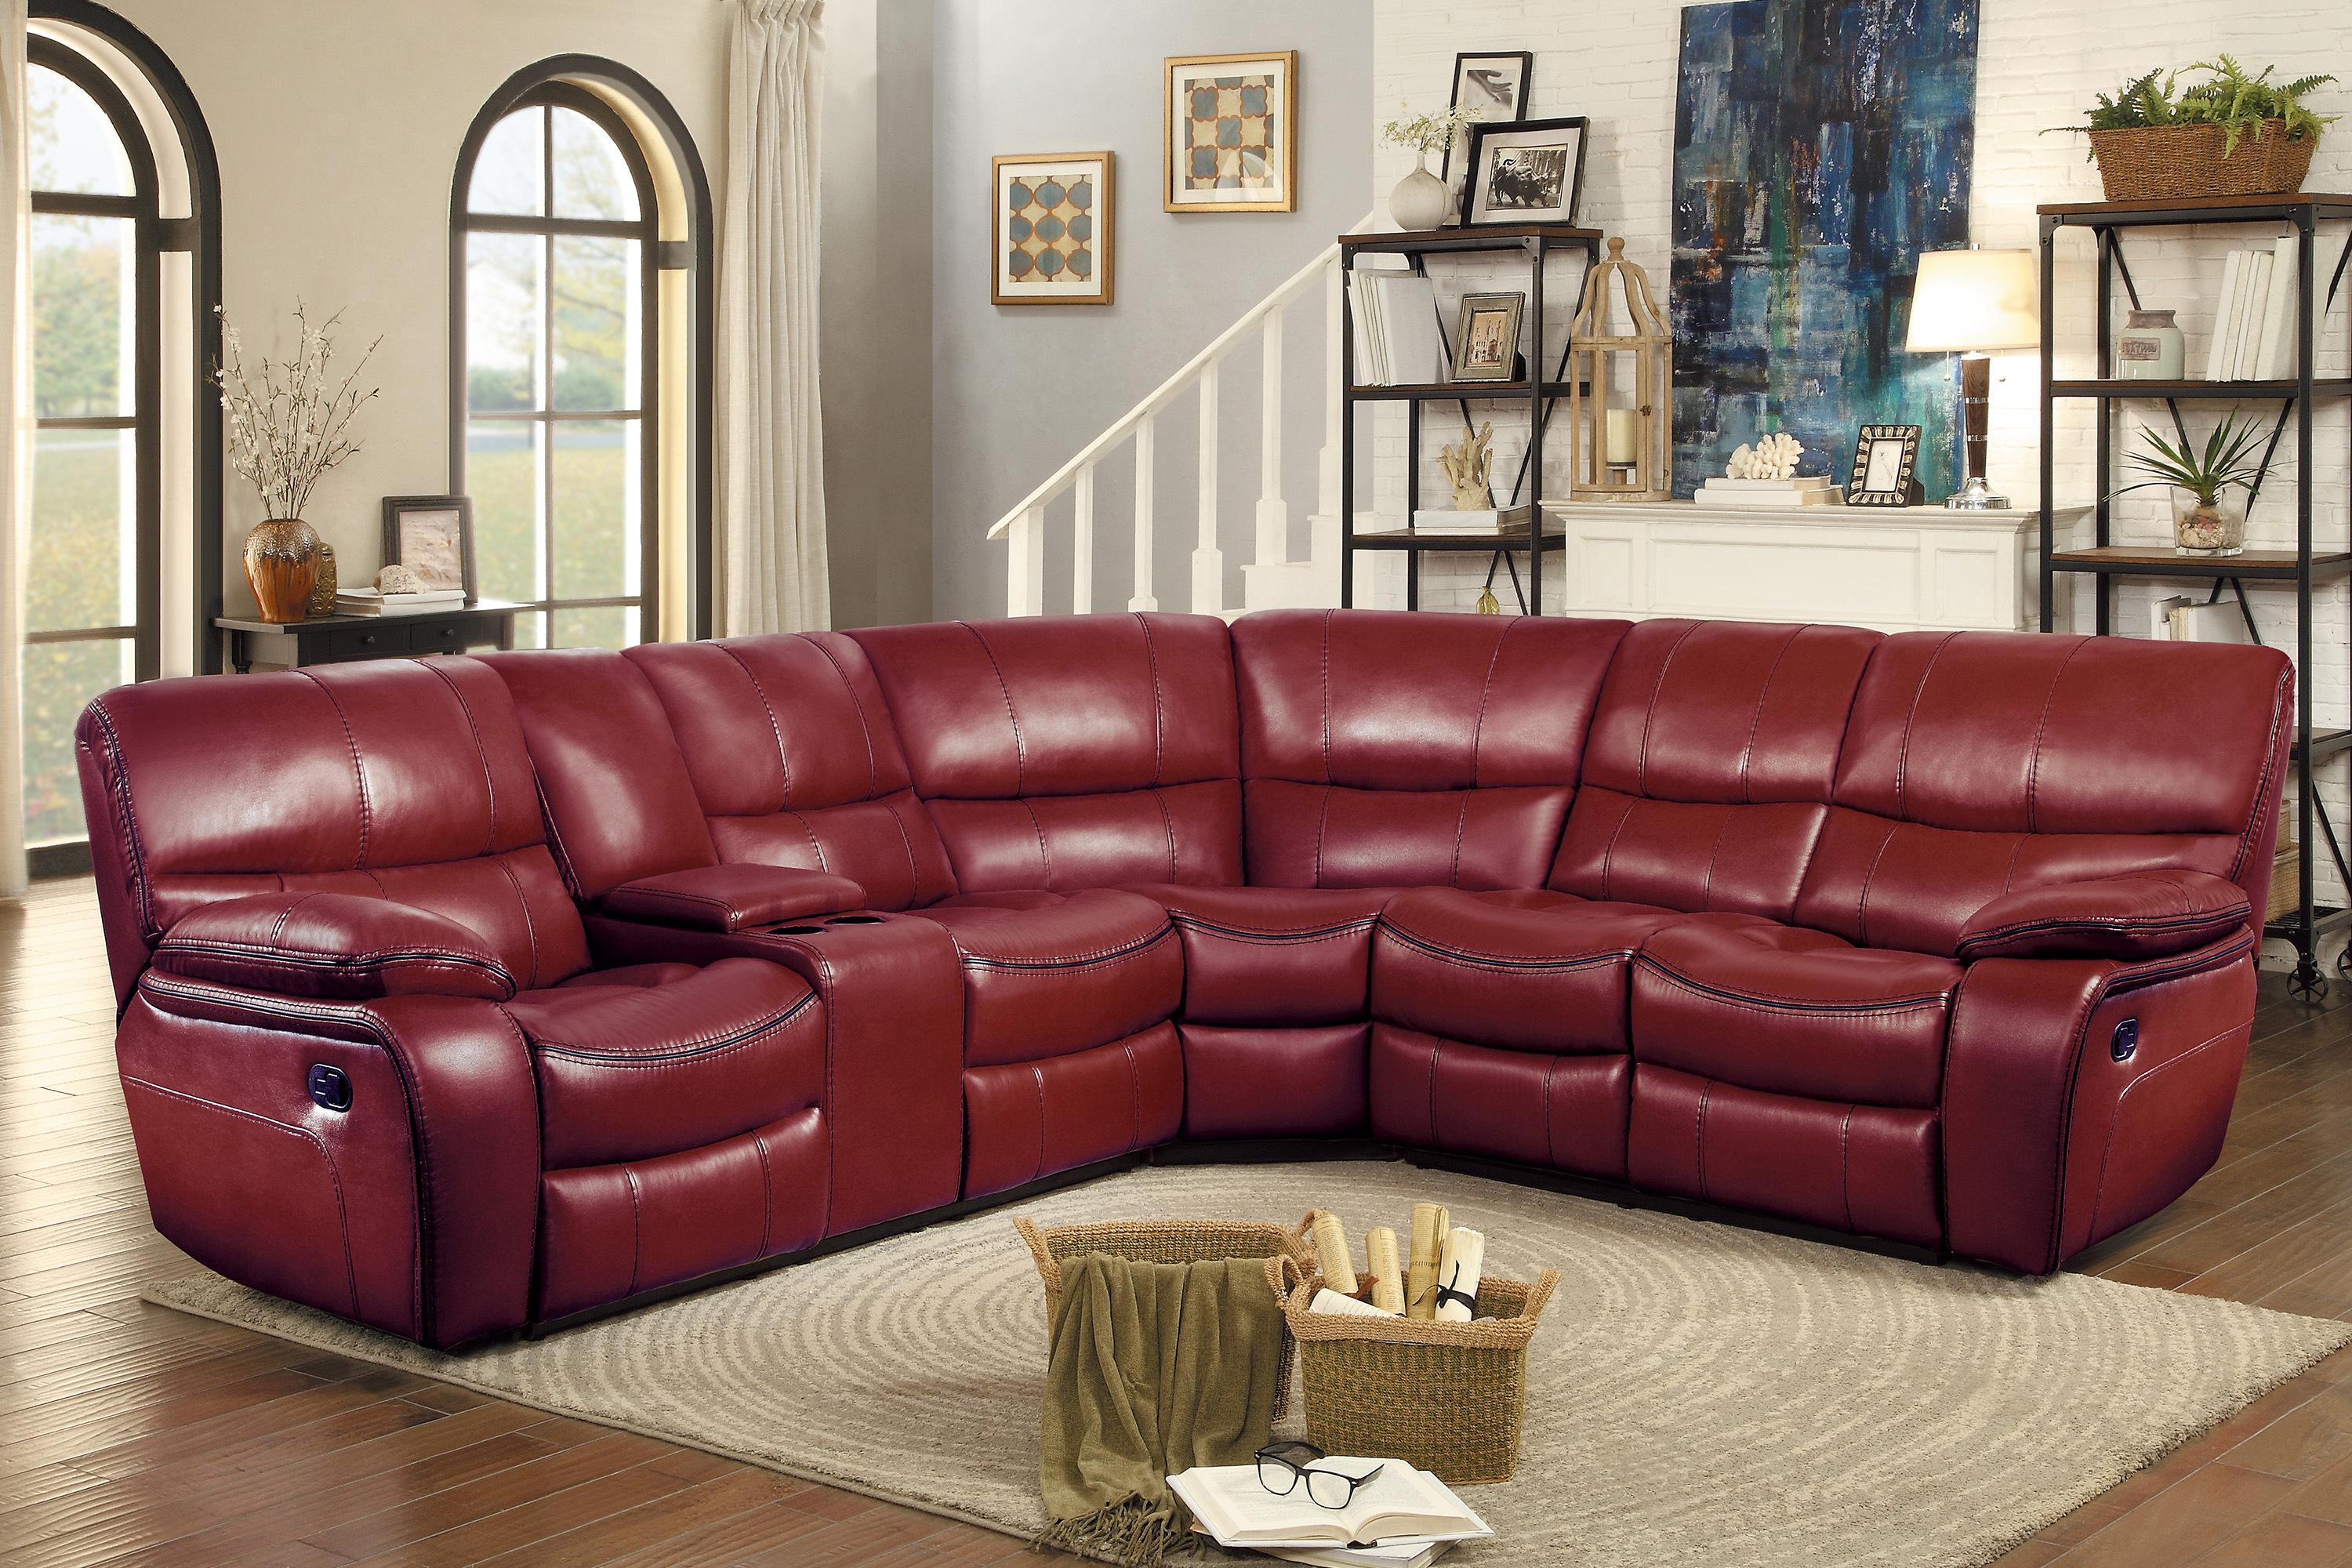 

    
Homelegance 8480RED*3SC Pecos Reclining Sectional Red 8480RED*3SC
